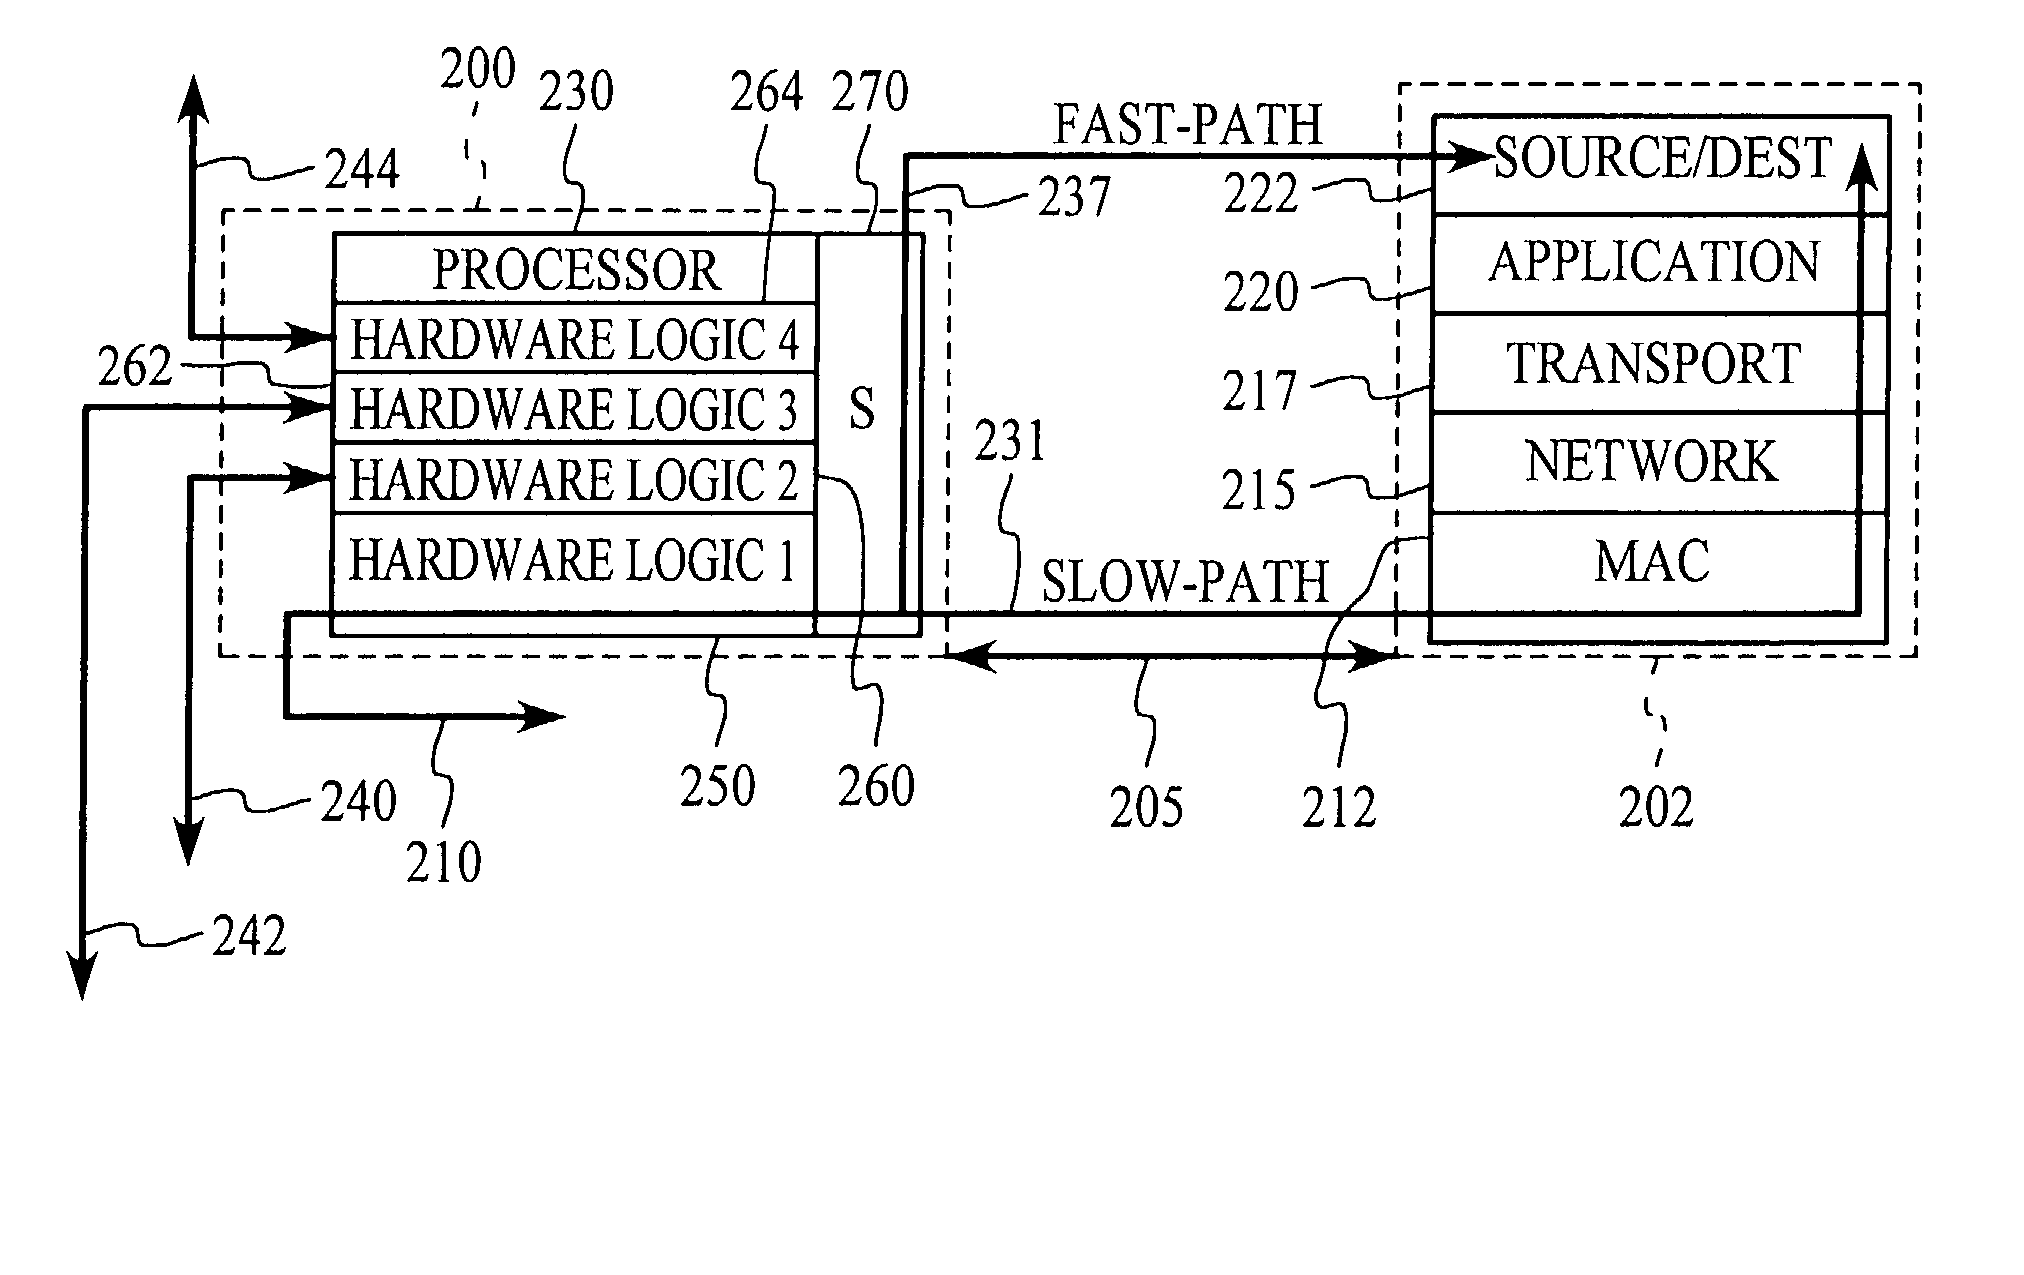 TCP/IP offload network interface device